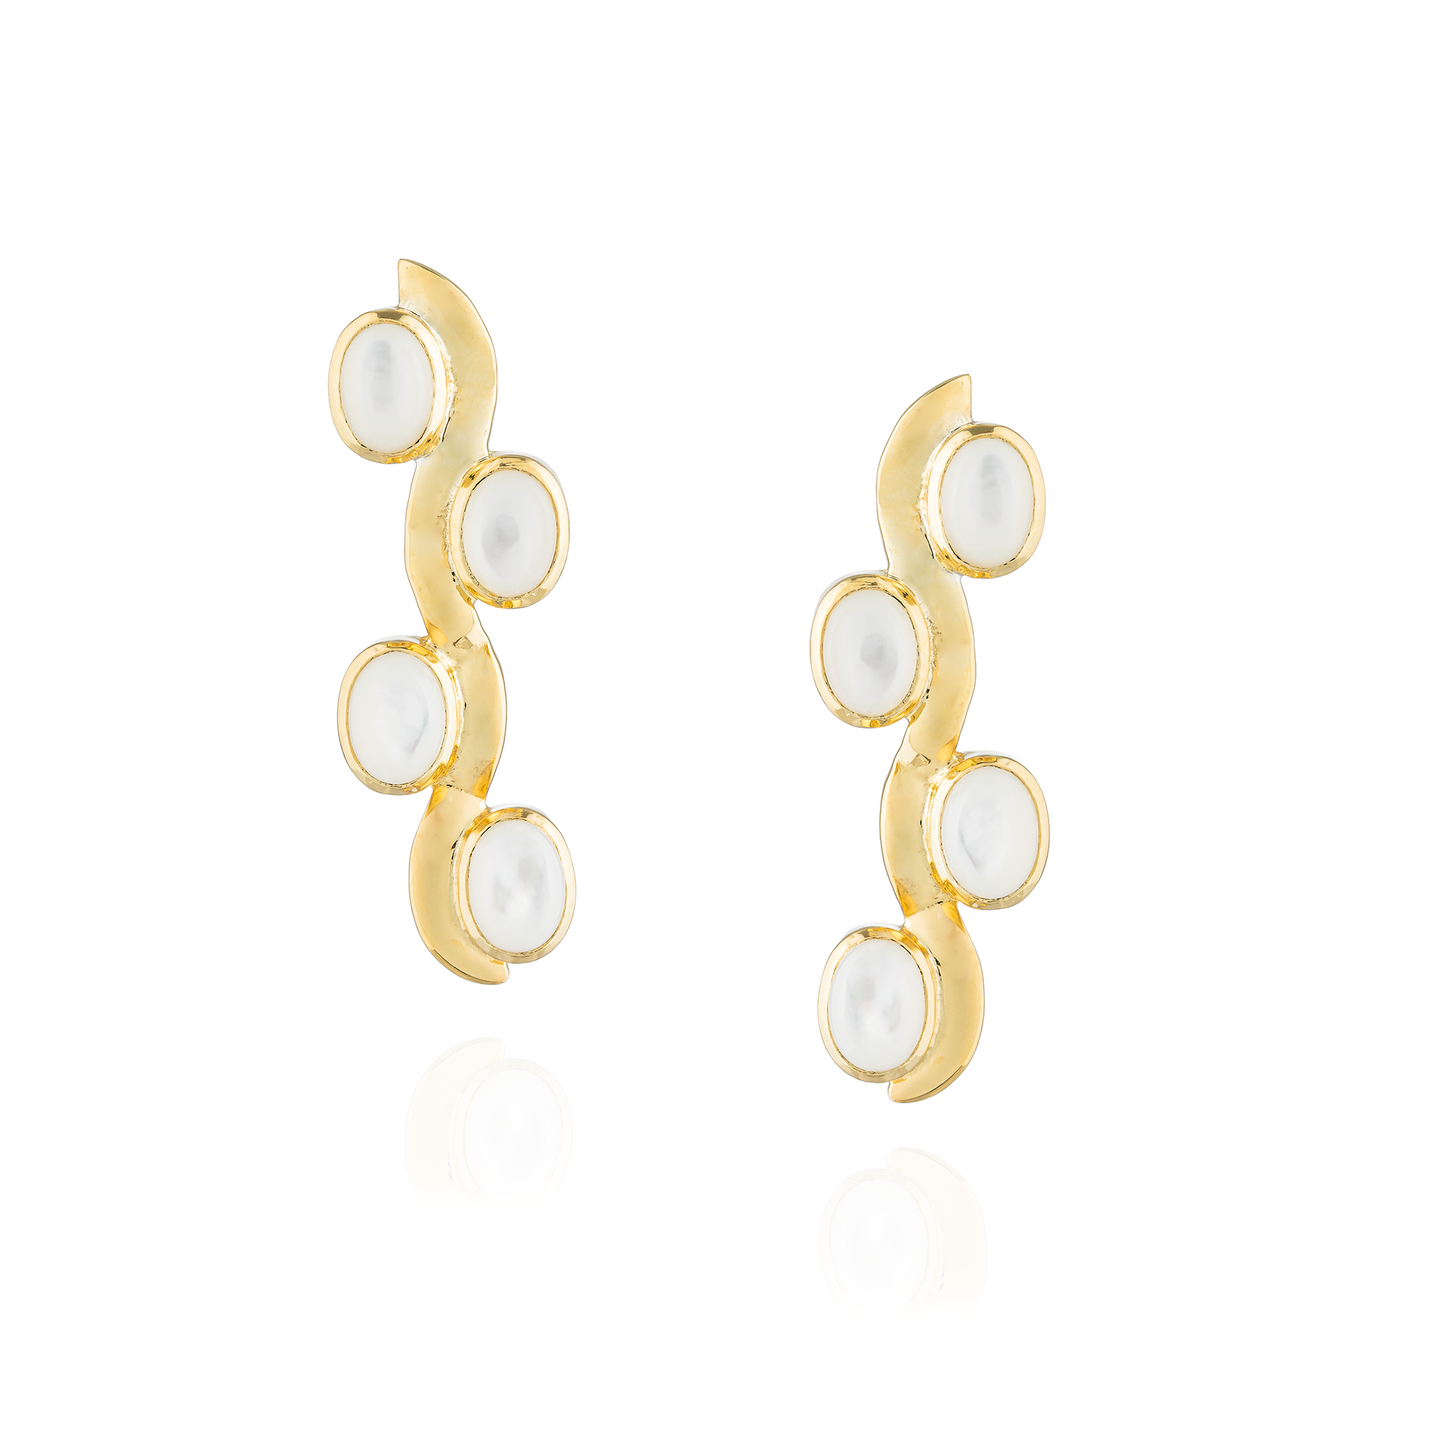 925 Silver Earrings plated in 18k Yellow Gold with Mother of Pearl Cabouchon